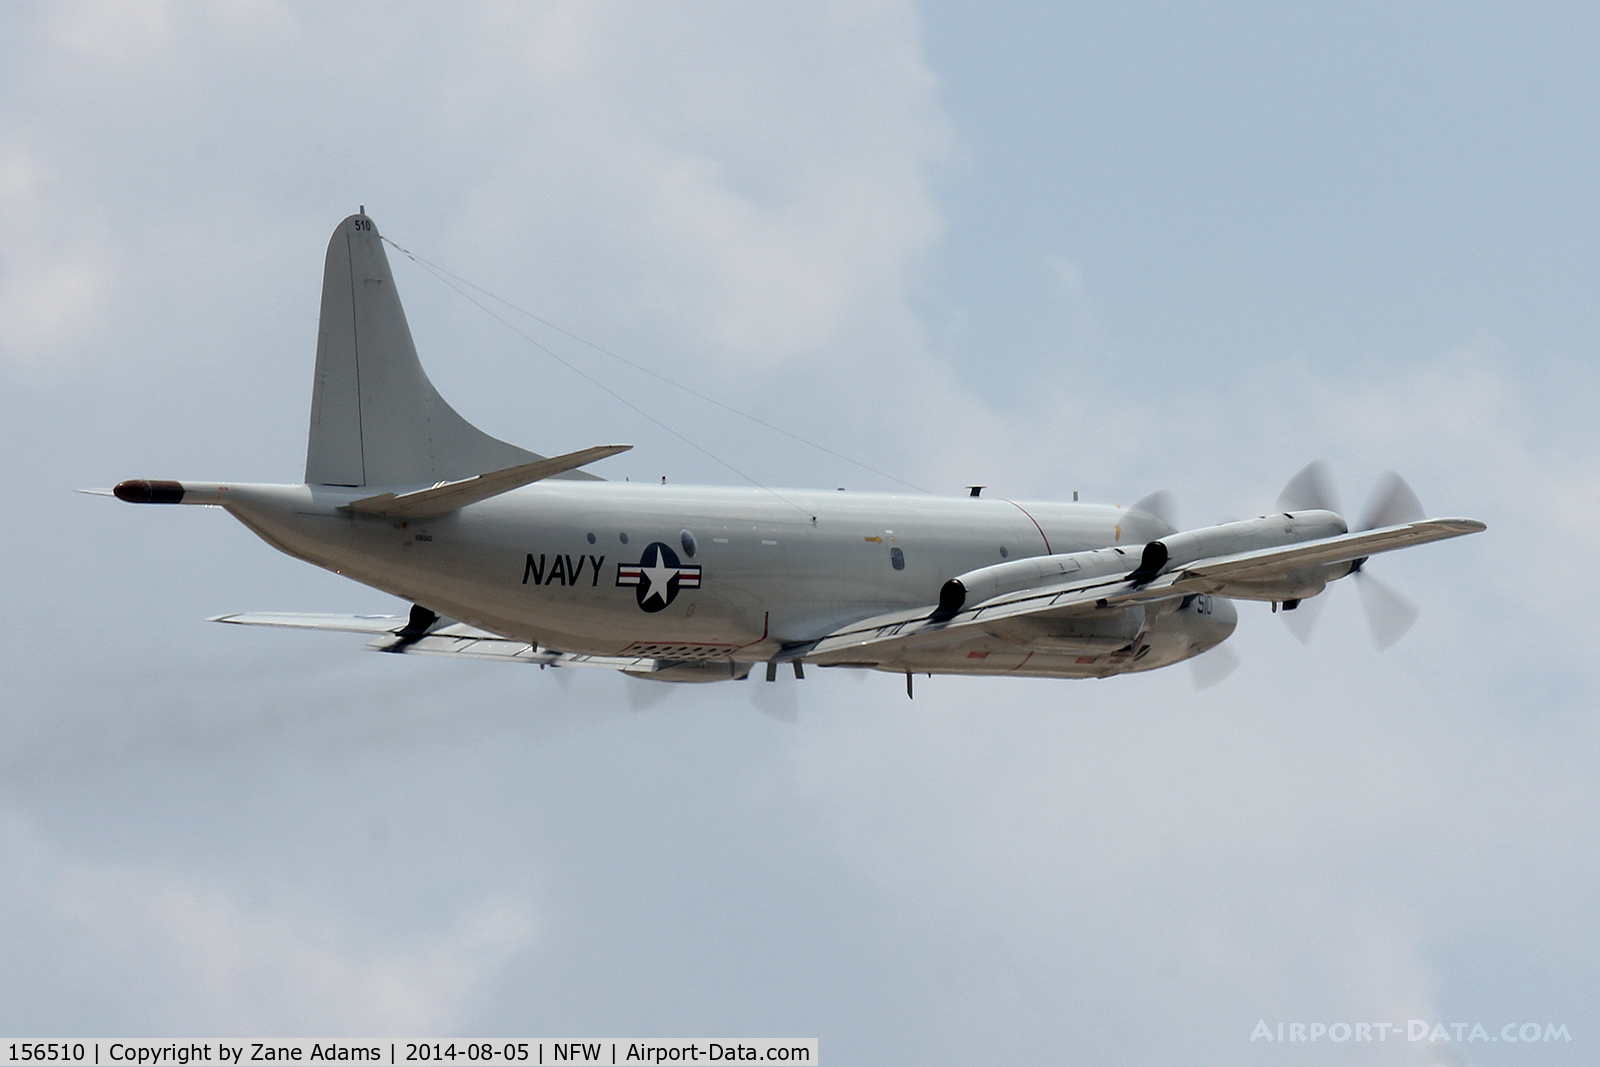 156510, 1968 Lockheed P-3C Orion C/N 285A-5504, At NAS Fort Worth